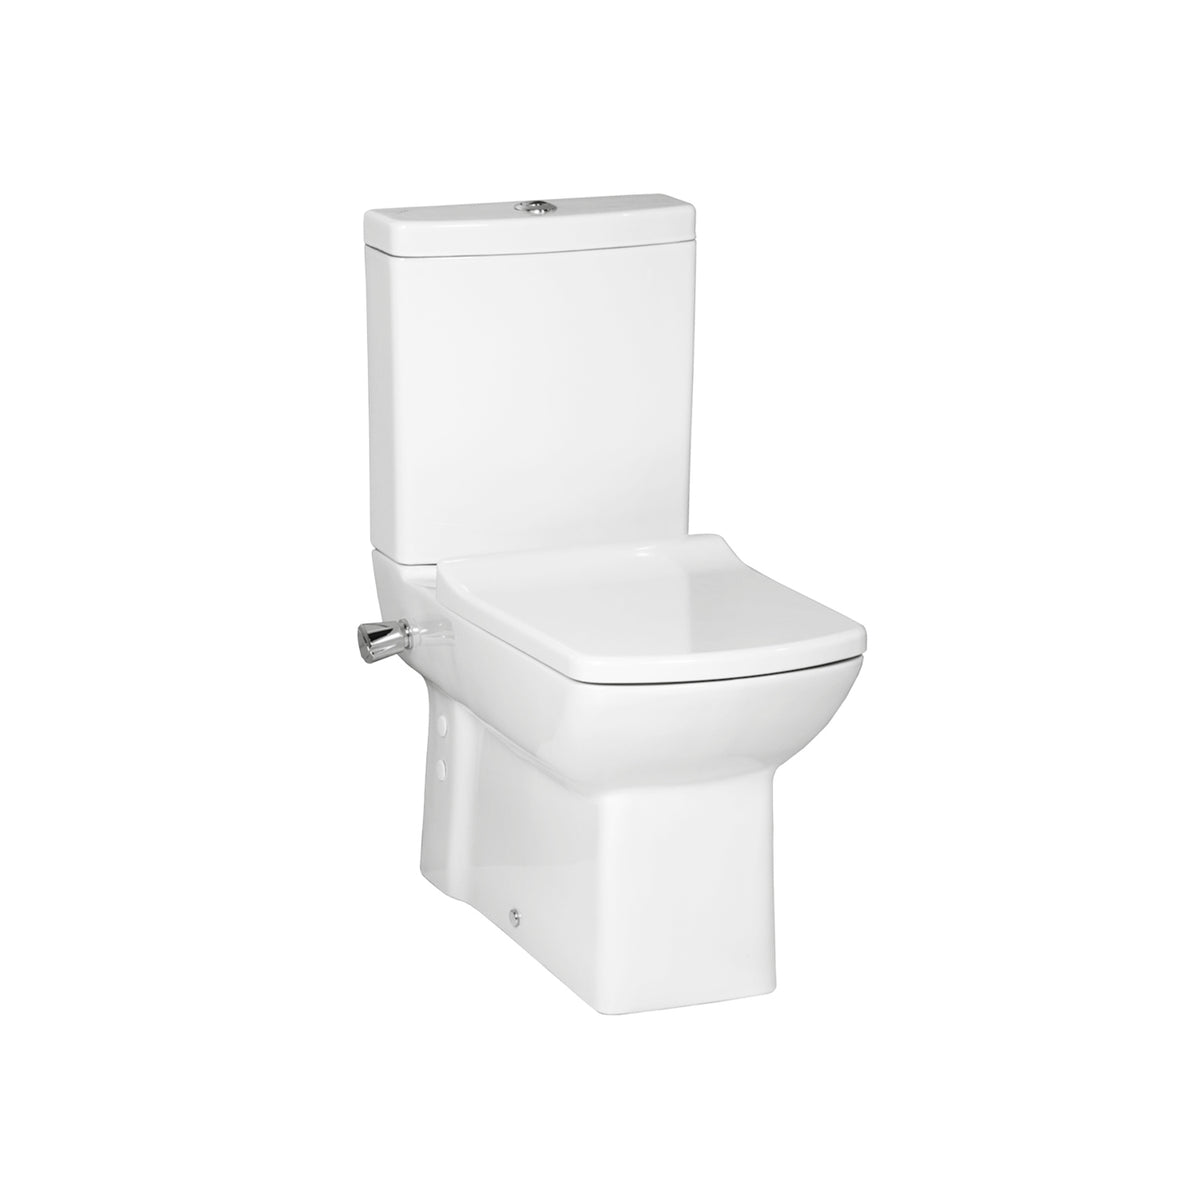 Short Projection Wall Hung Combined Bidet Toilet With Soft Close